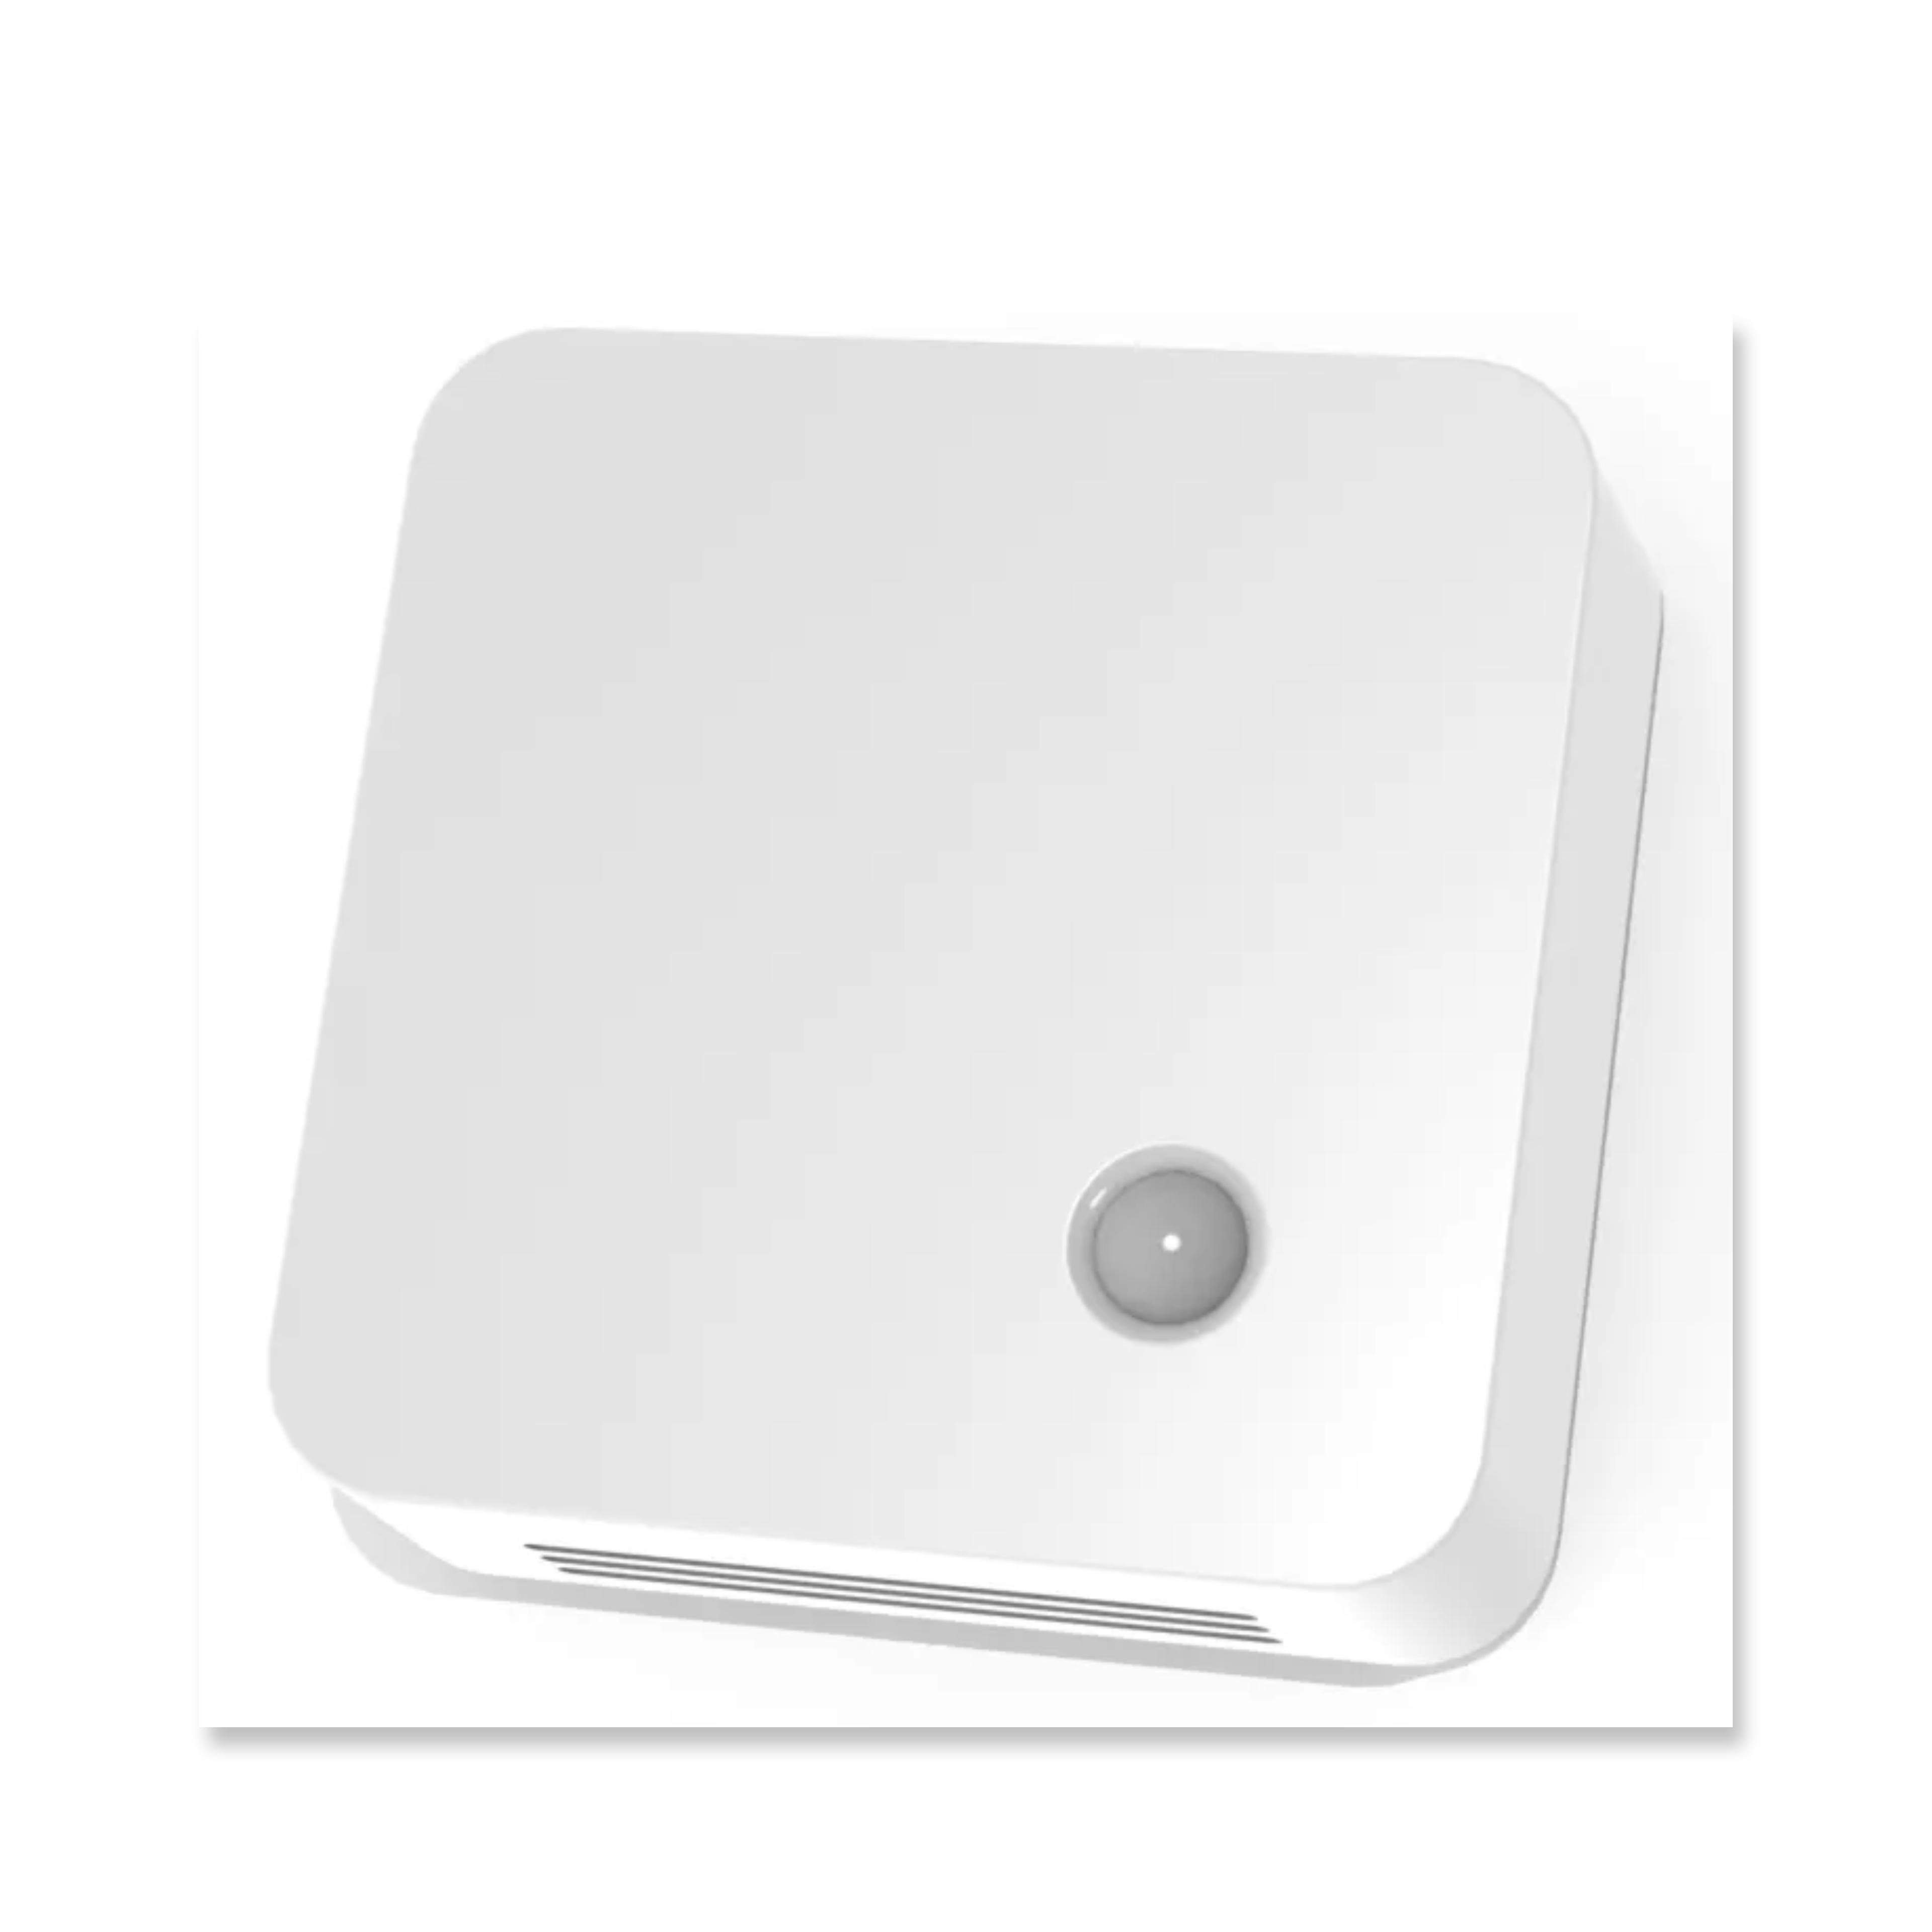 ELSYS ERS Eye wireless Multi room sensor for indoor climate, light, motion and occupancy measurement